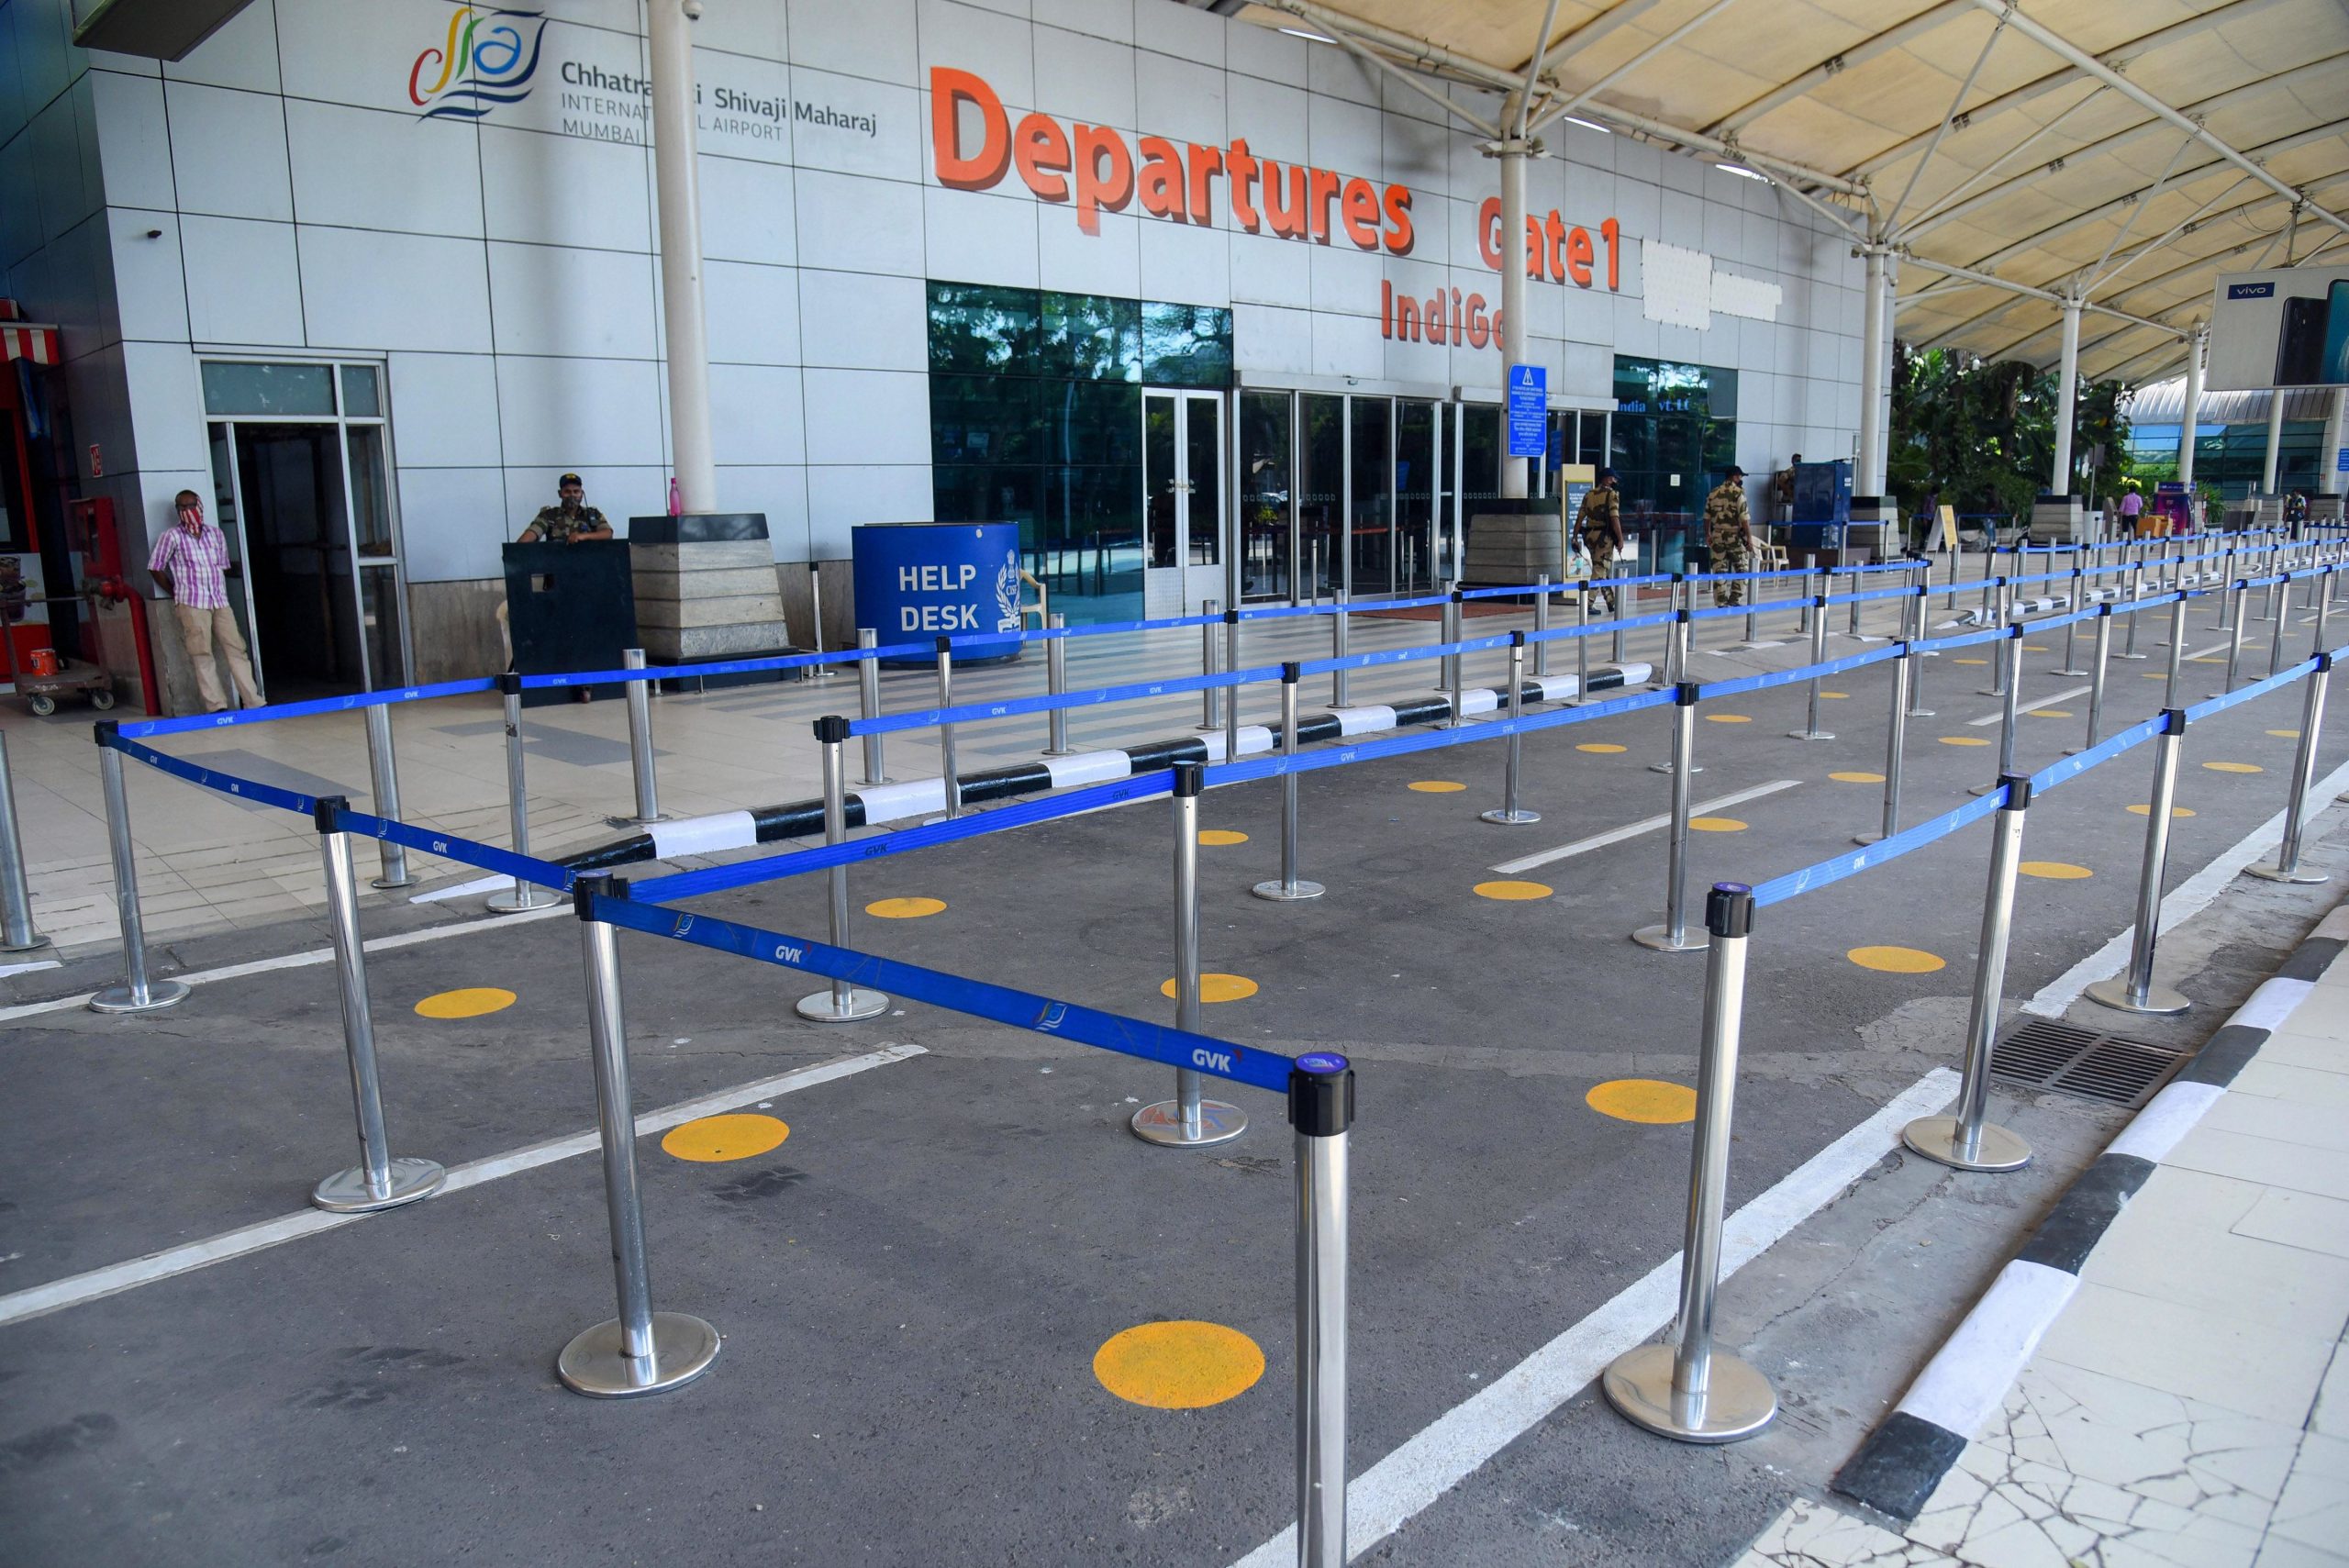 Consider spot fines for people flouting COVID rules at airports: DGCA